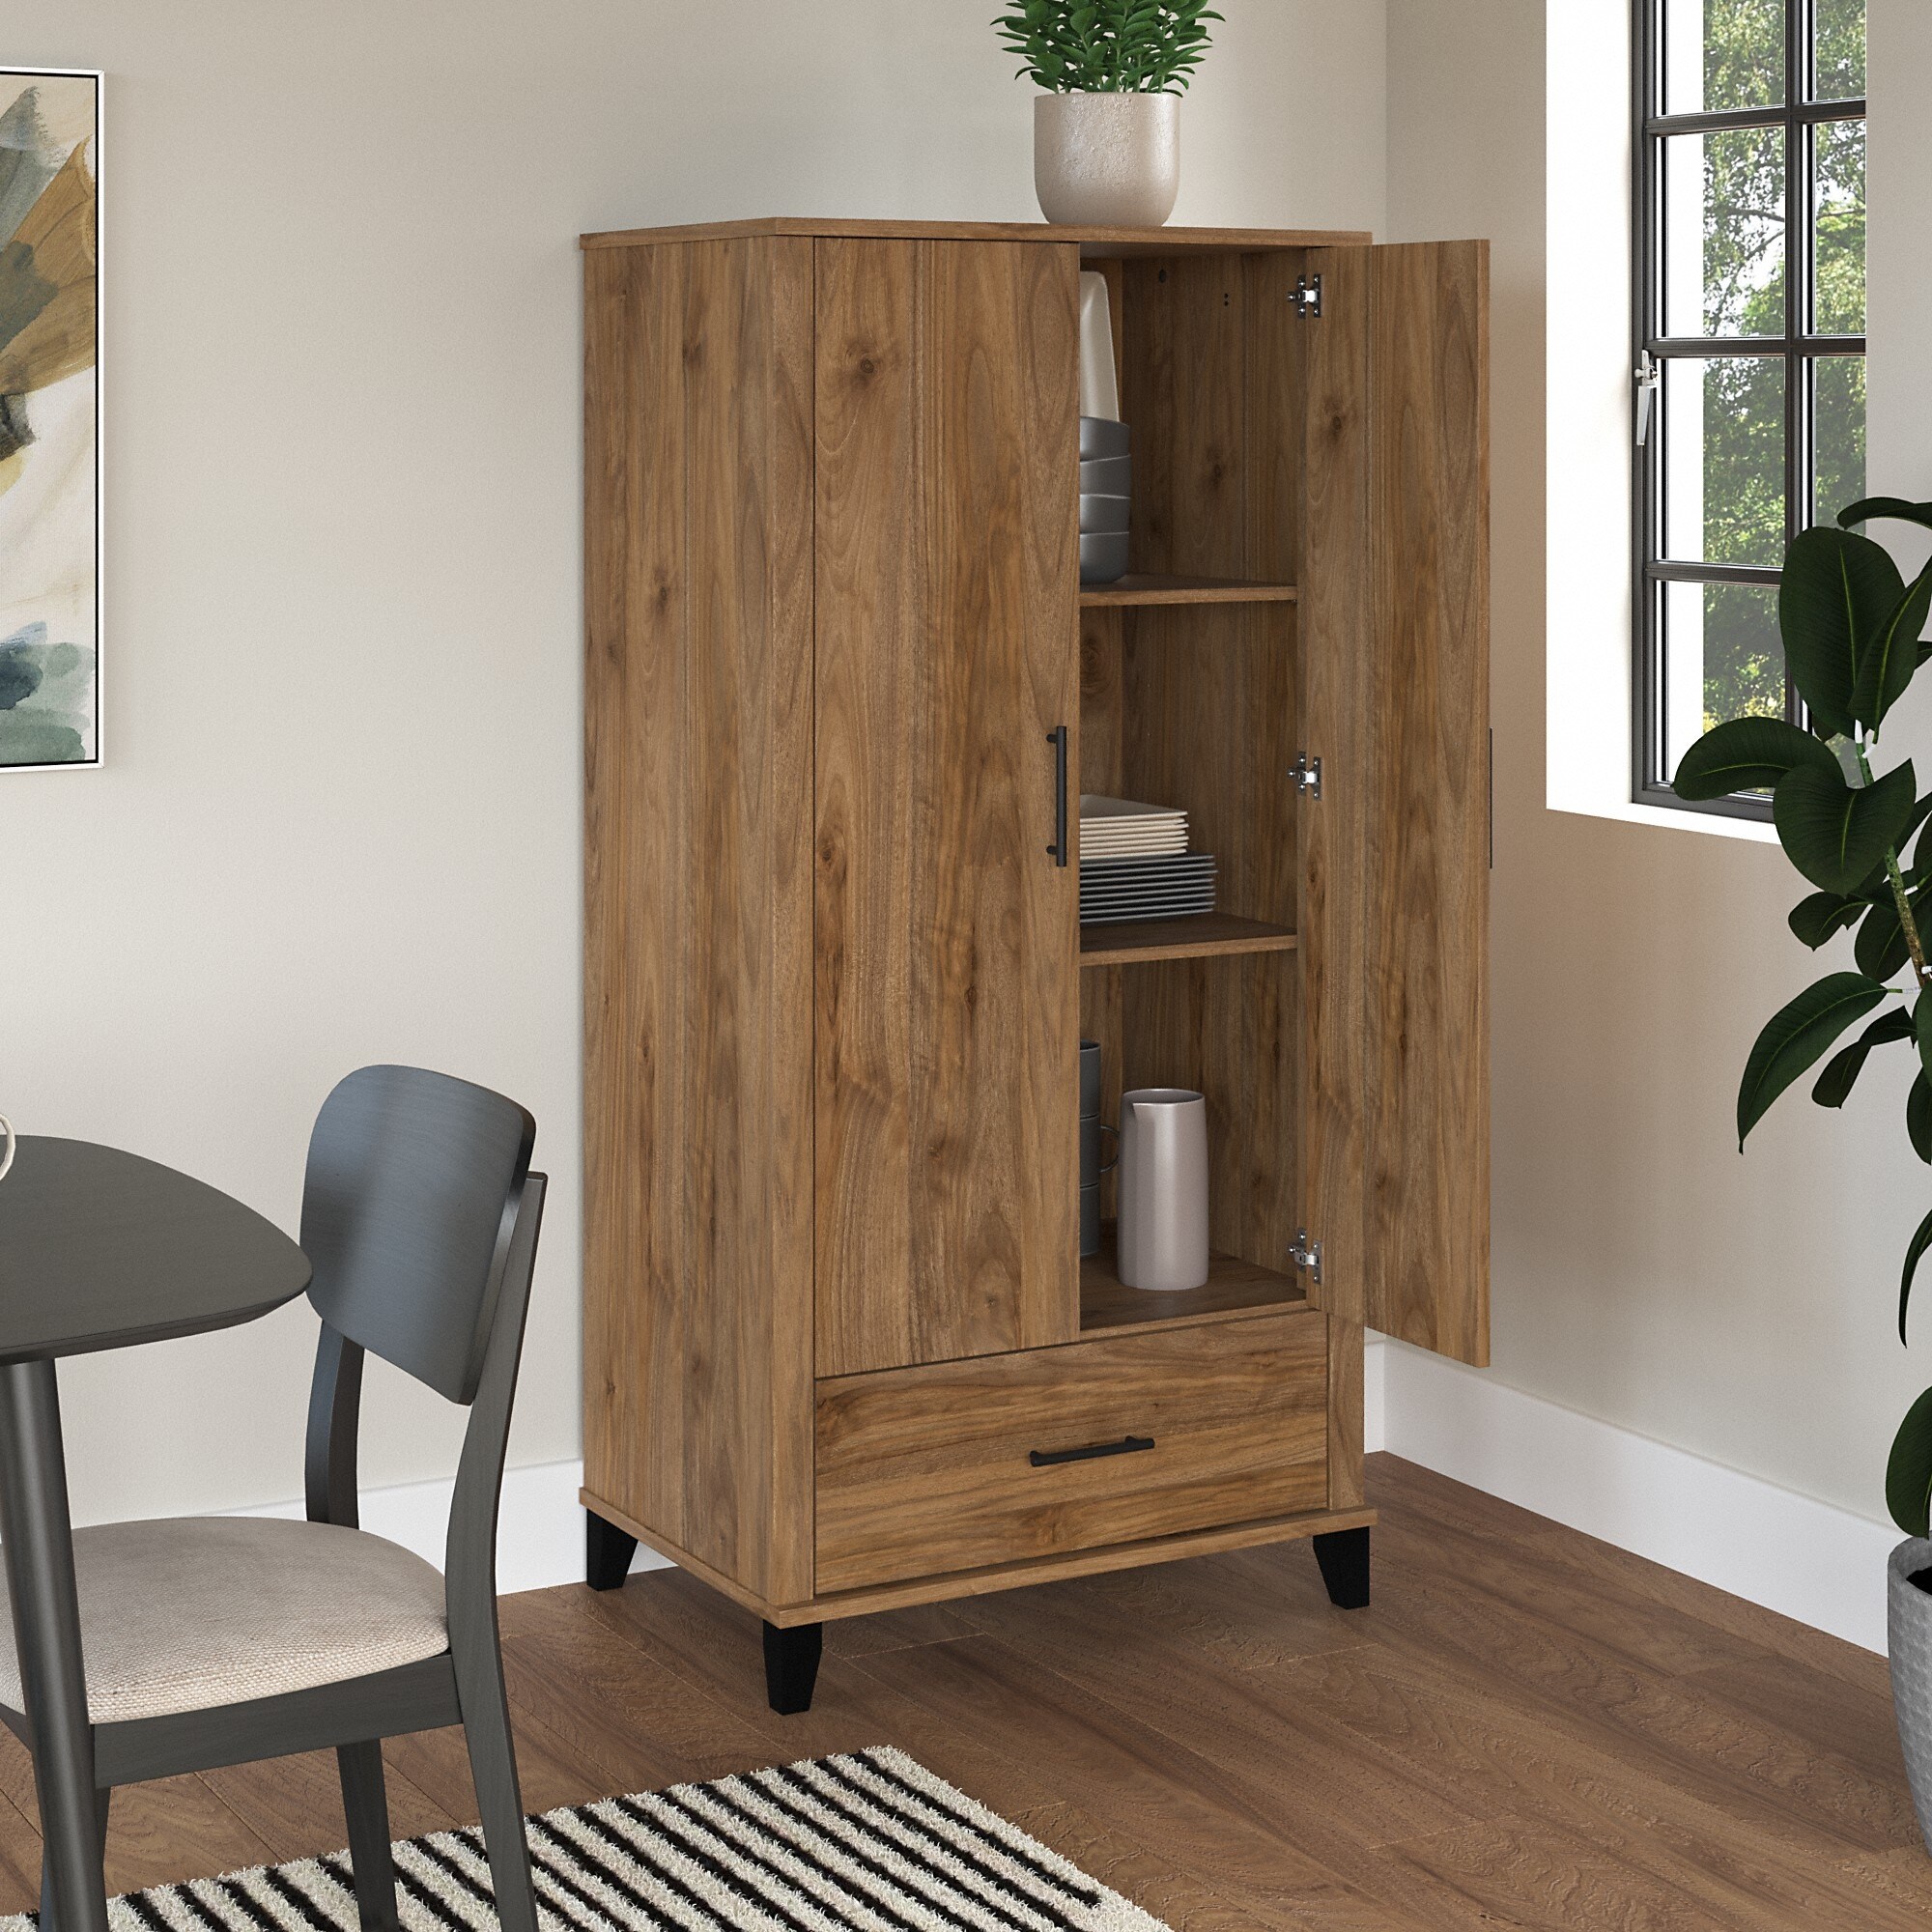 https://ak1.ostkcdn.com/images/products/is/images/direct/0e3da5a30722fdd677cd62f521c7c02c8d3c691b/Somerset-Tall-Kitchen-Pantry-Cabinet-with-Drawer-by-Bush-Furniture.jpg